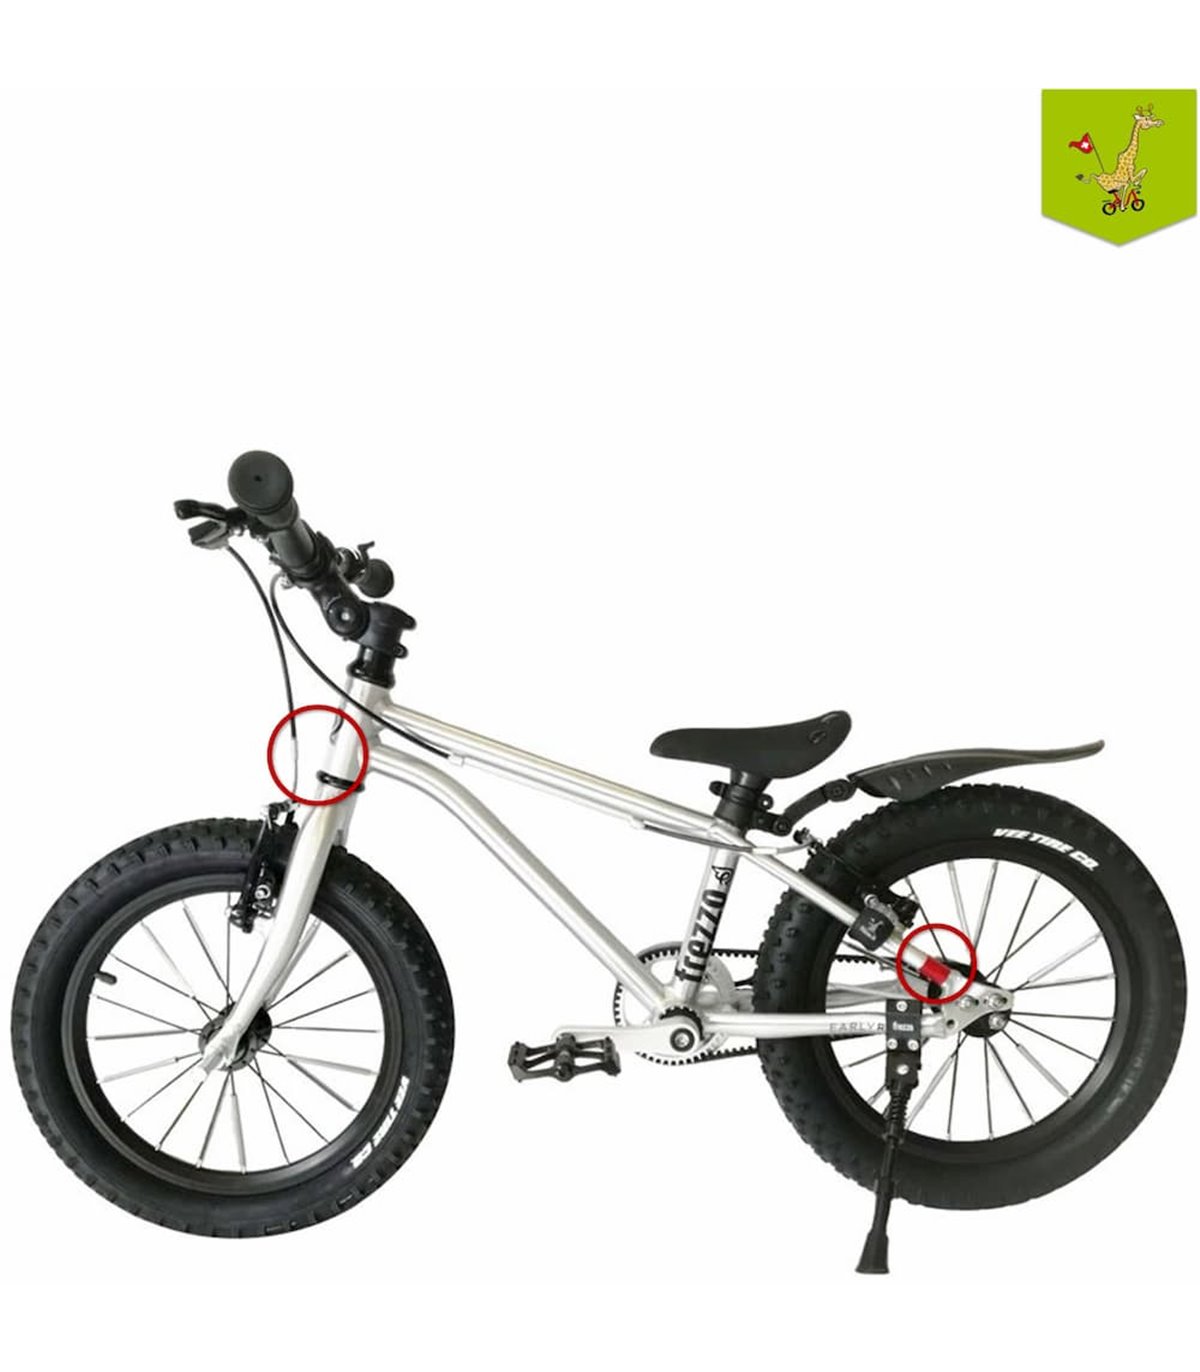 Reflector for Children Bike 1x white front and 1x red rear